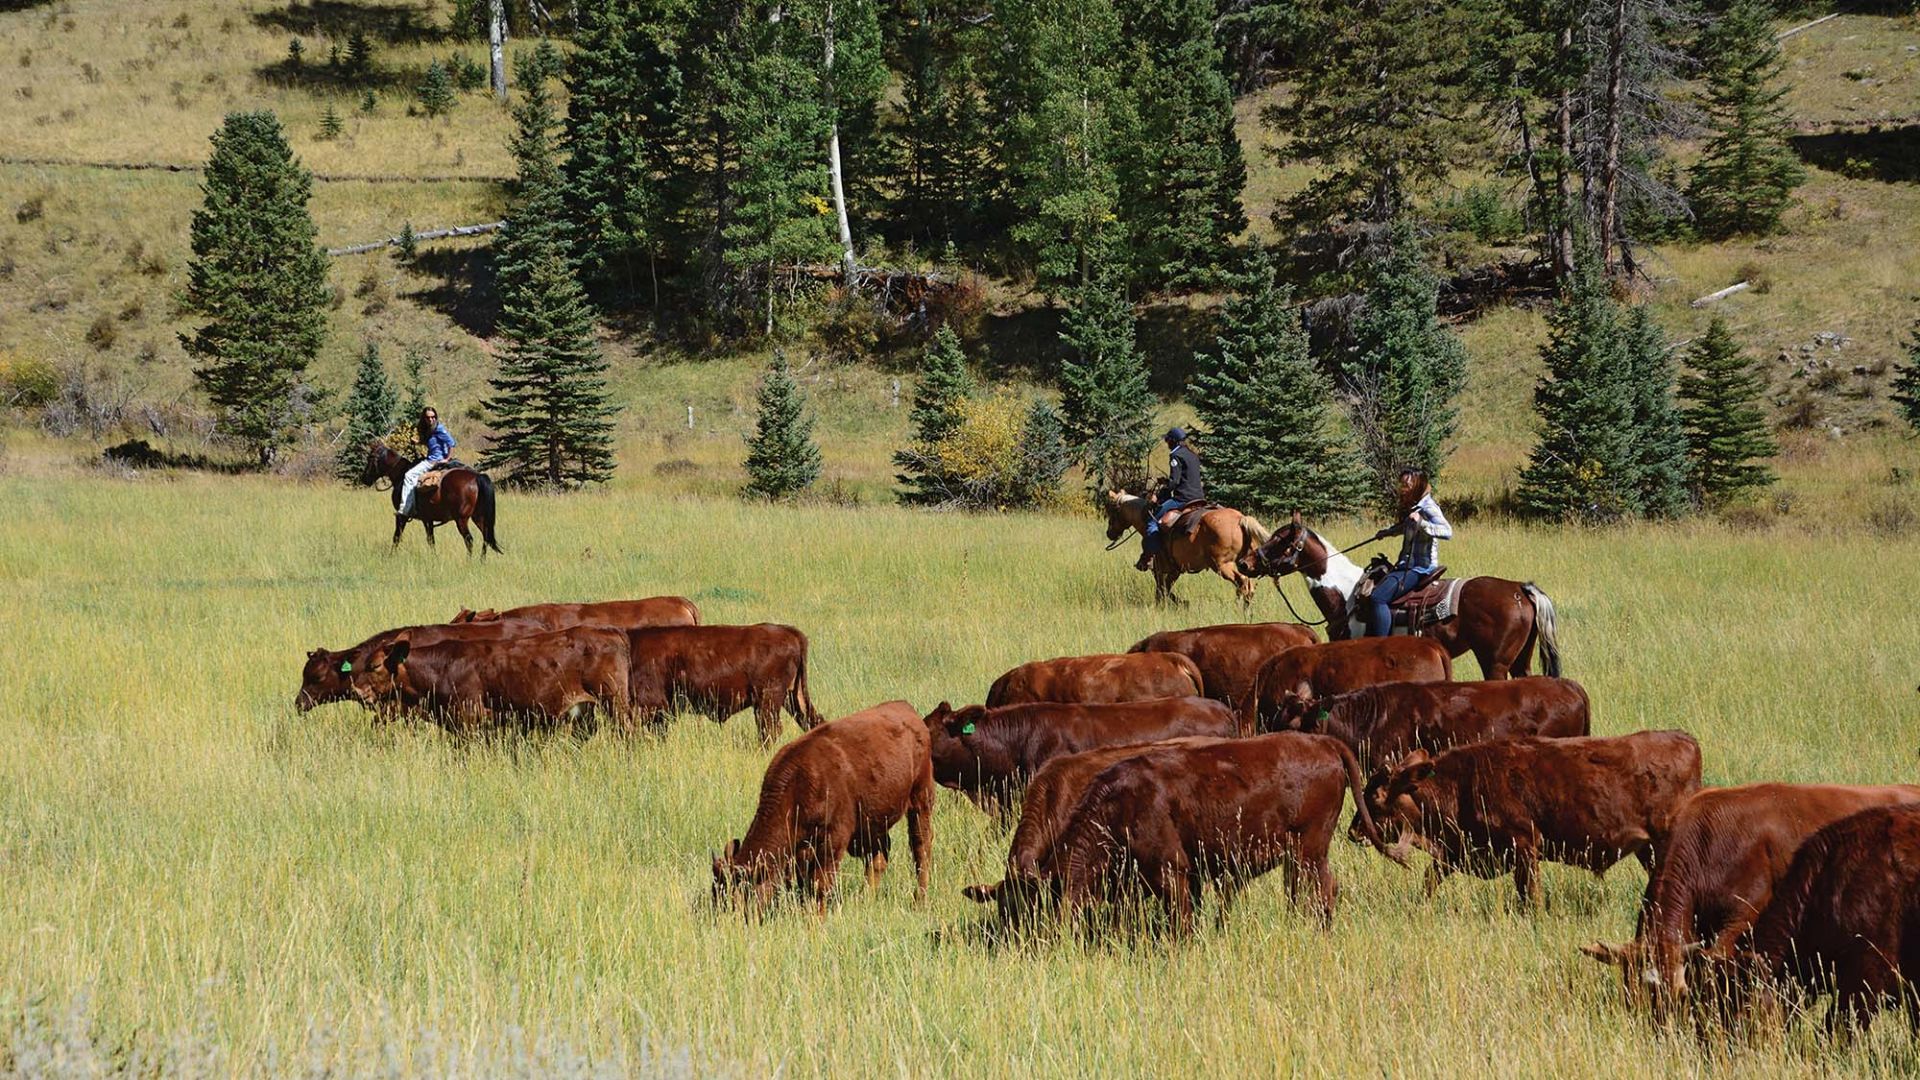 A Herd Of Cattle Standing On Top Of A Grass Covered Field